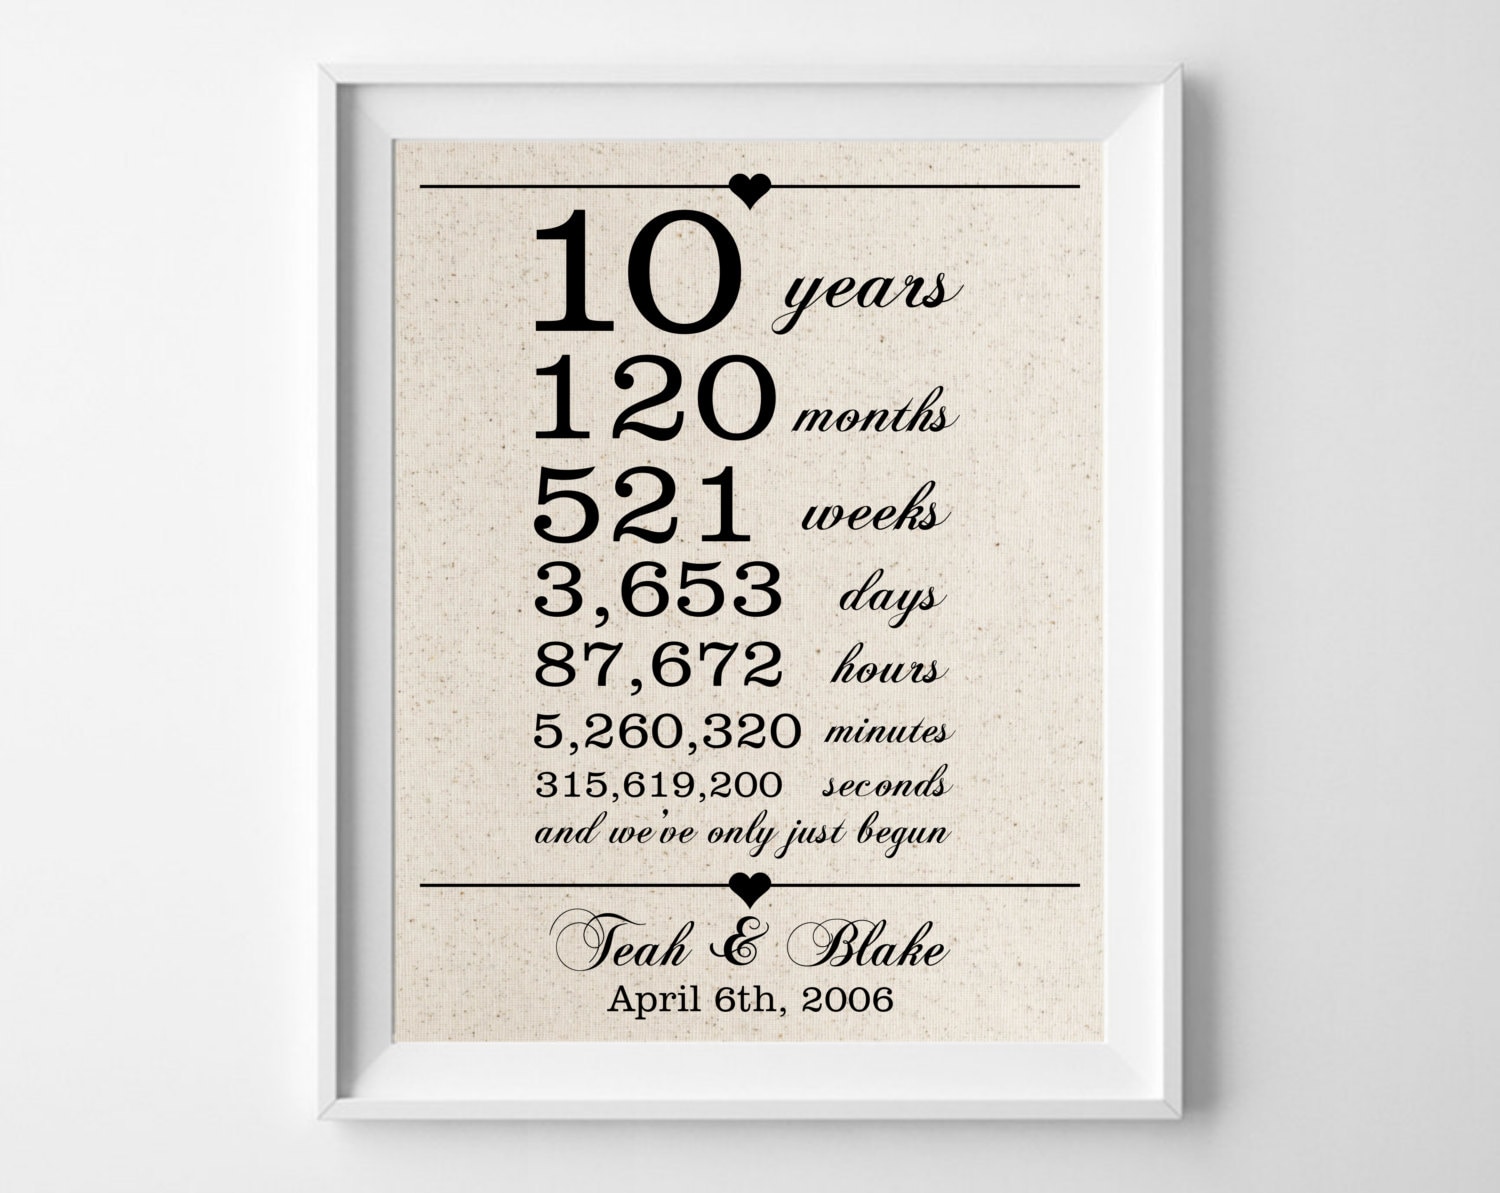 10 years together Cotton Gift Print 10th Anniversary Gifts
 Ten Year Wedding Anniversary